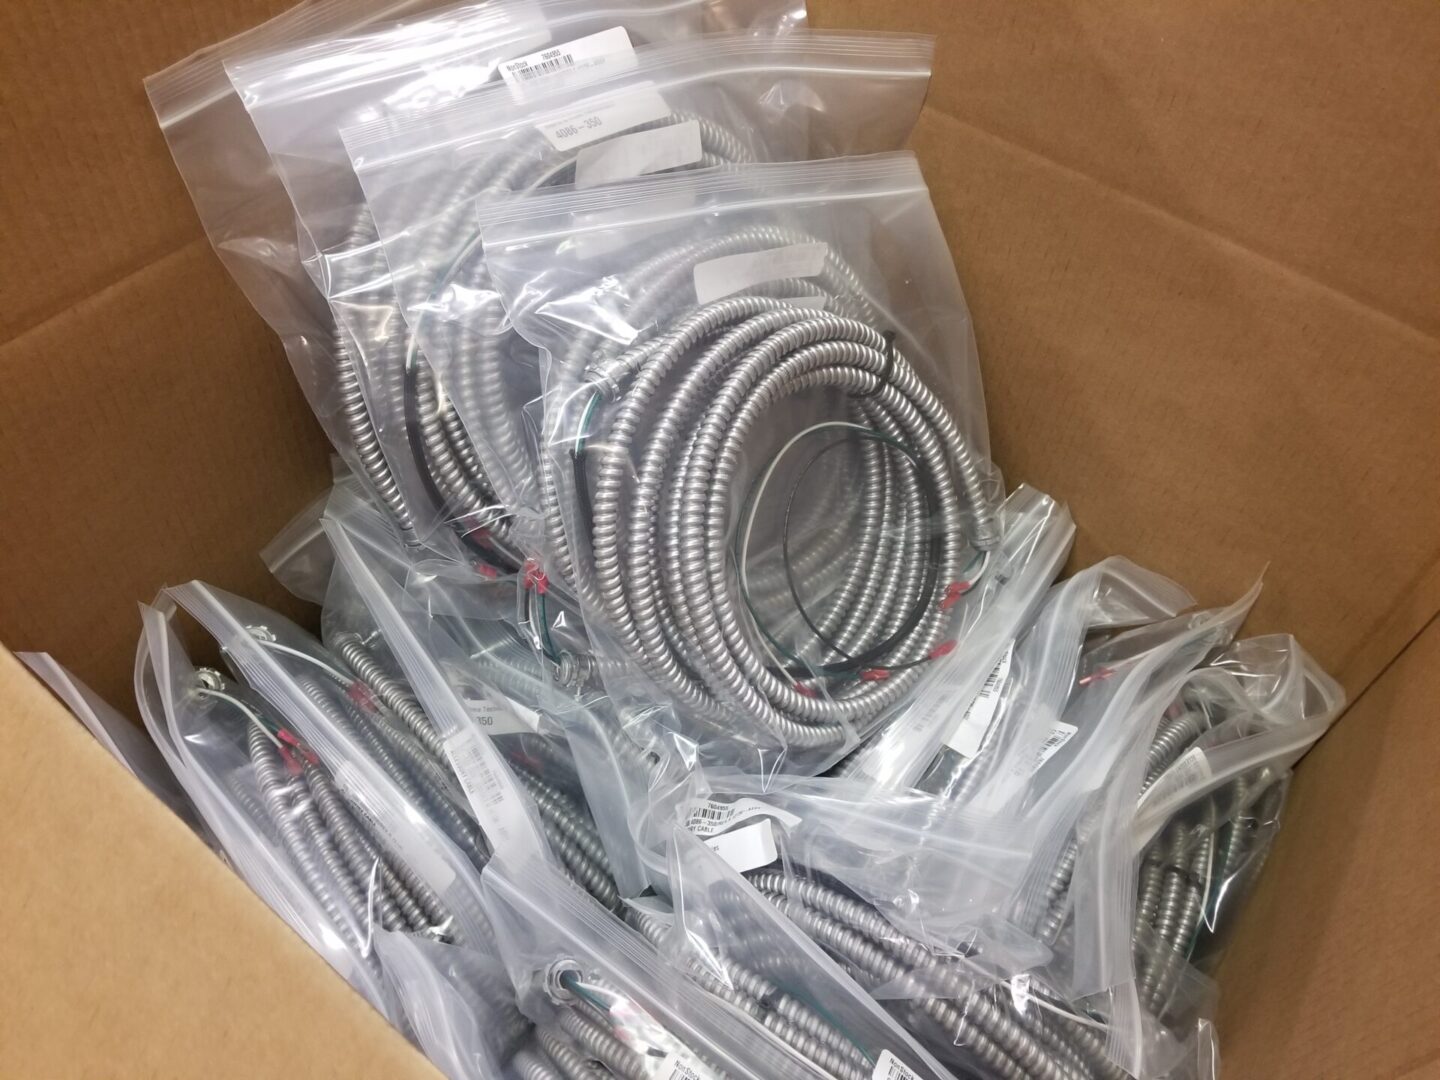 Cable kits